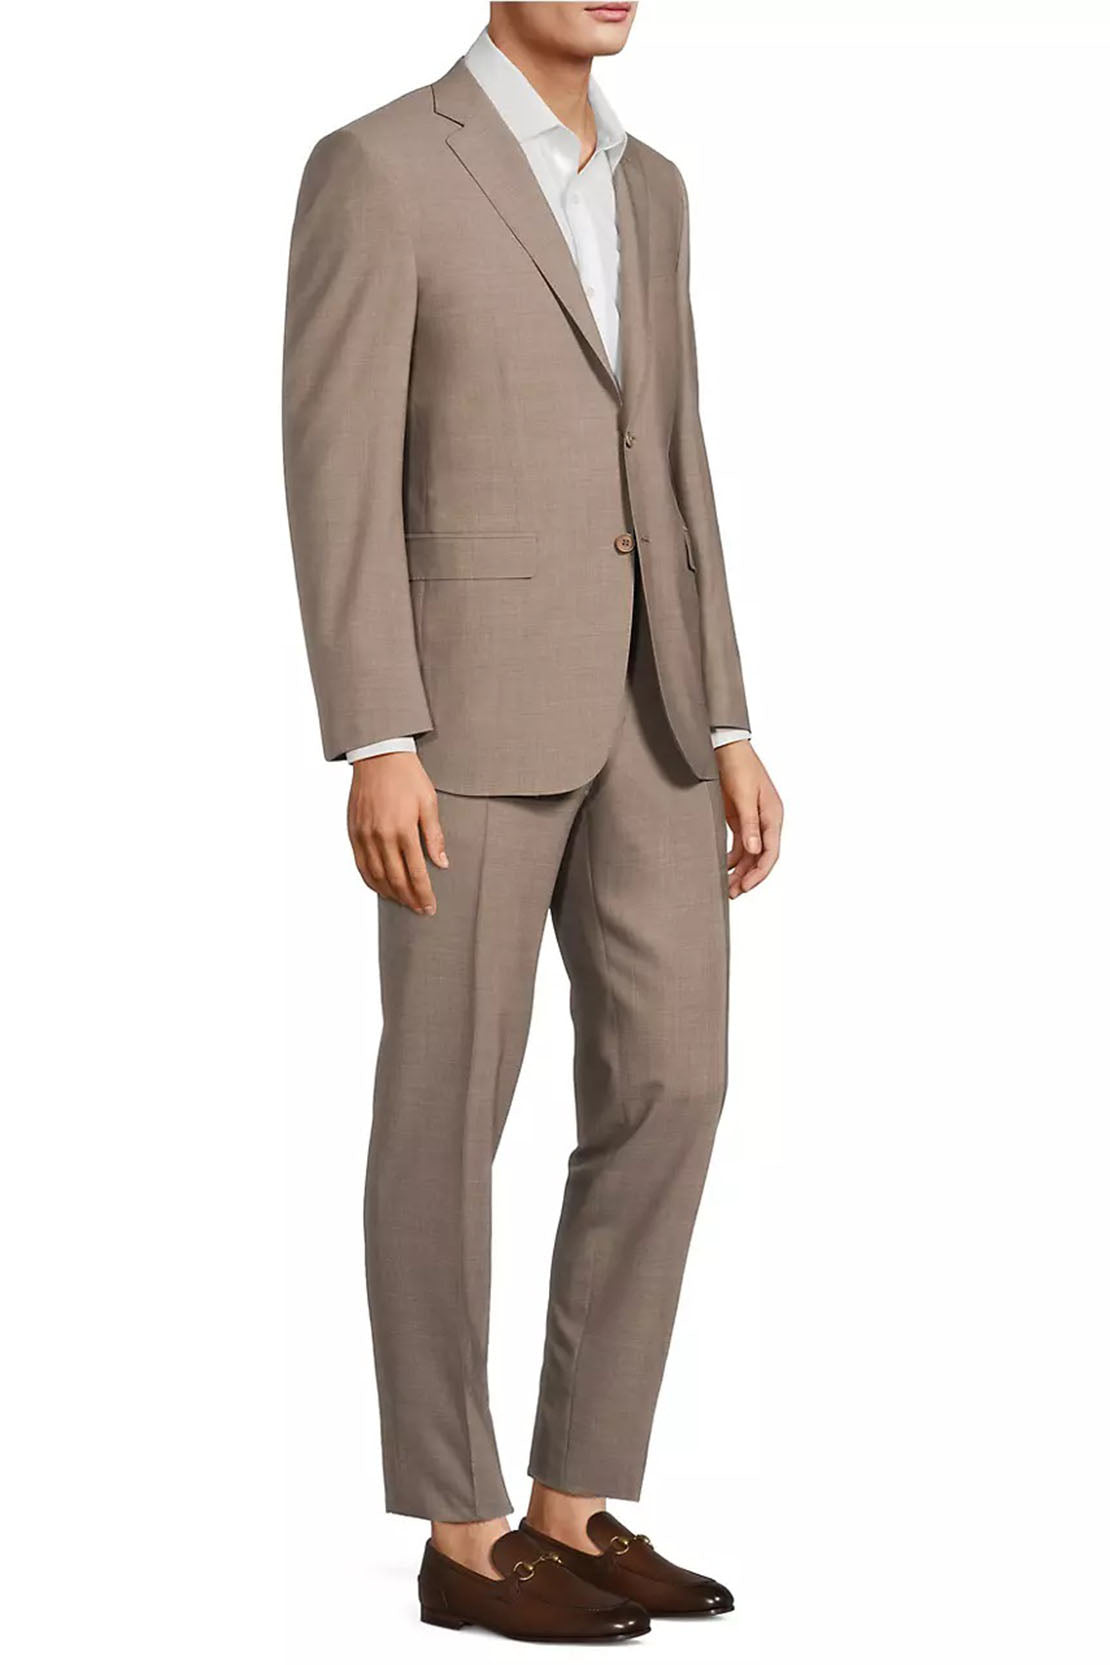 CANALI - Light Brown Modern Fit Suit 13280/31/7R-AA02524/705